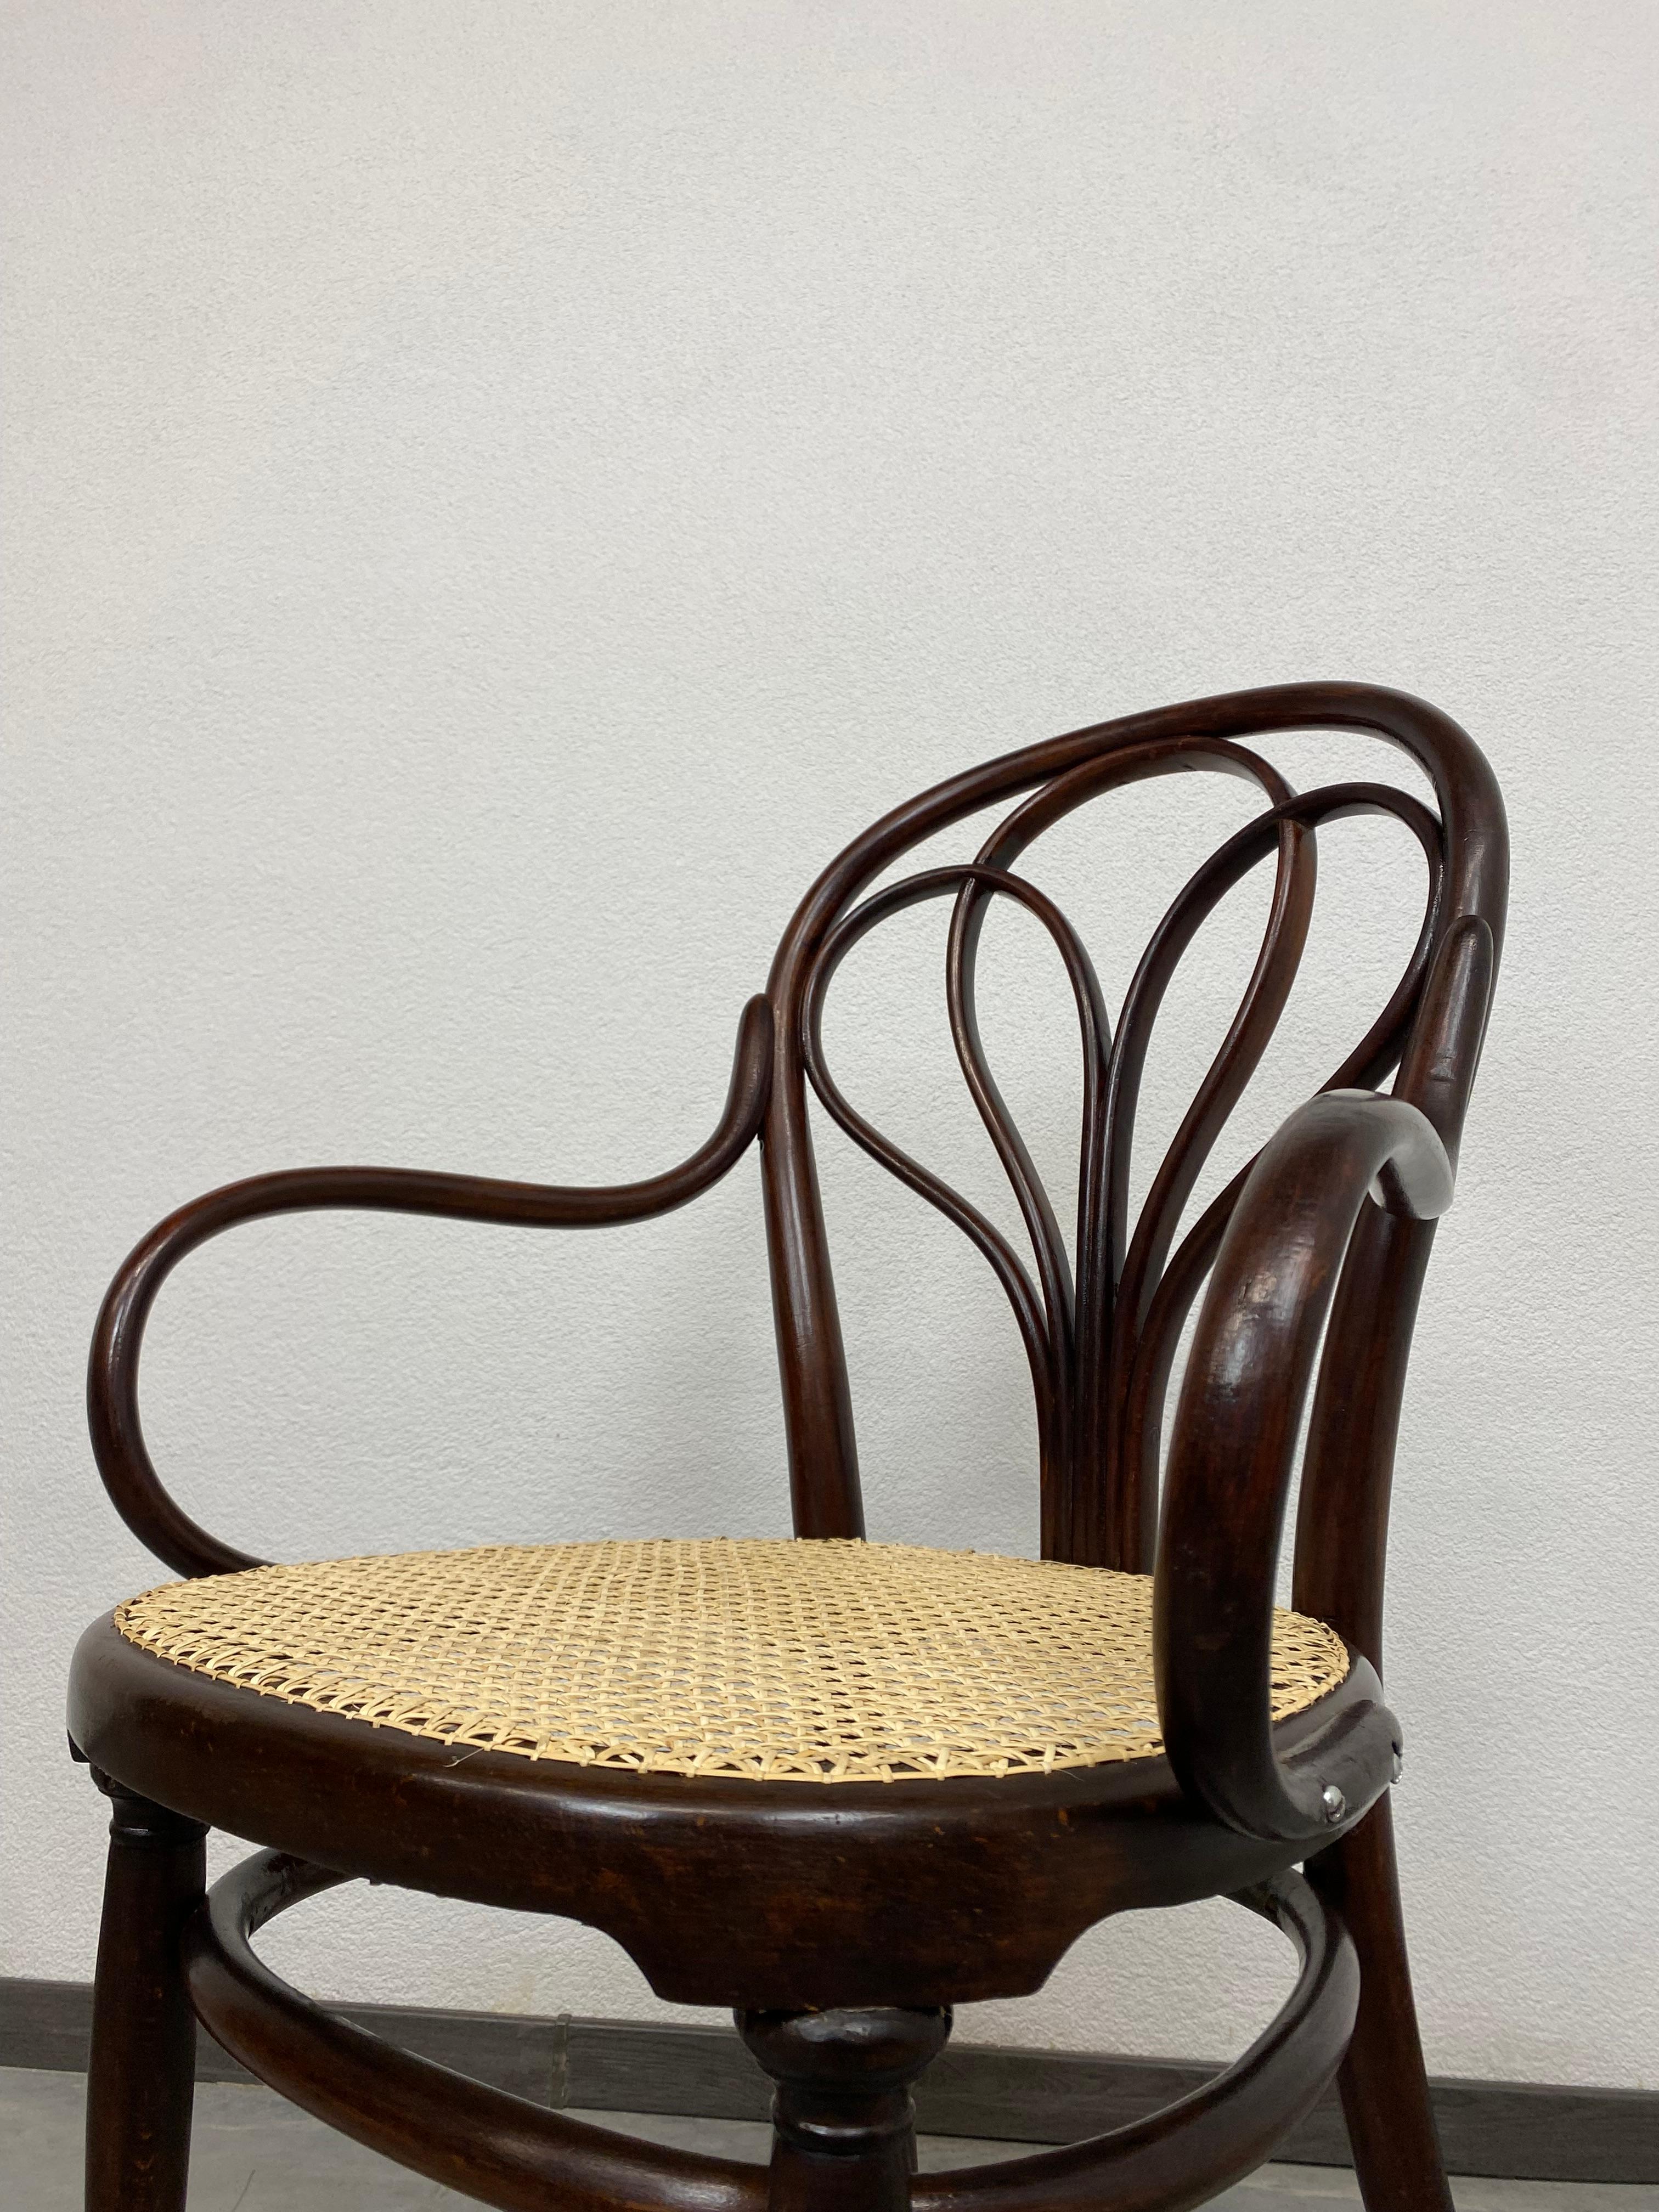 Early 20th Century Secession Desk Chair No. 25 by Thonet For Sale